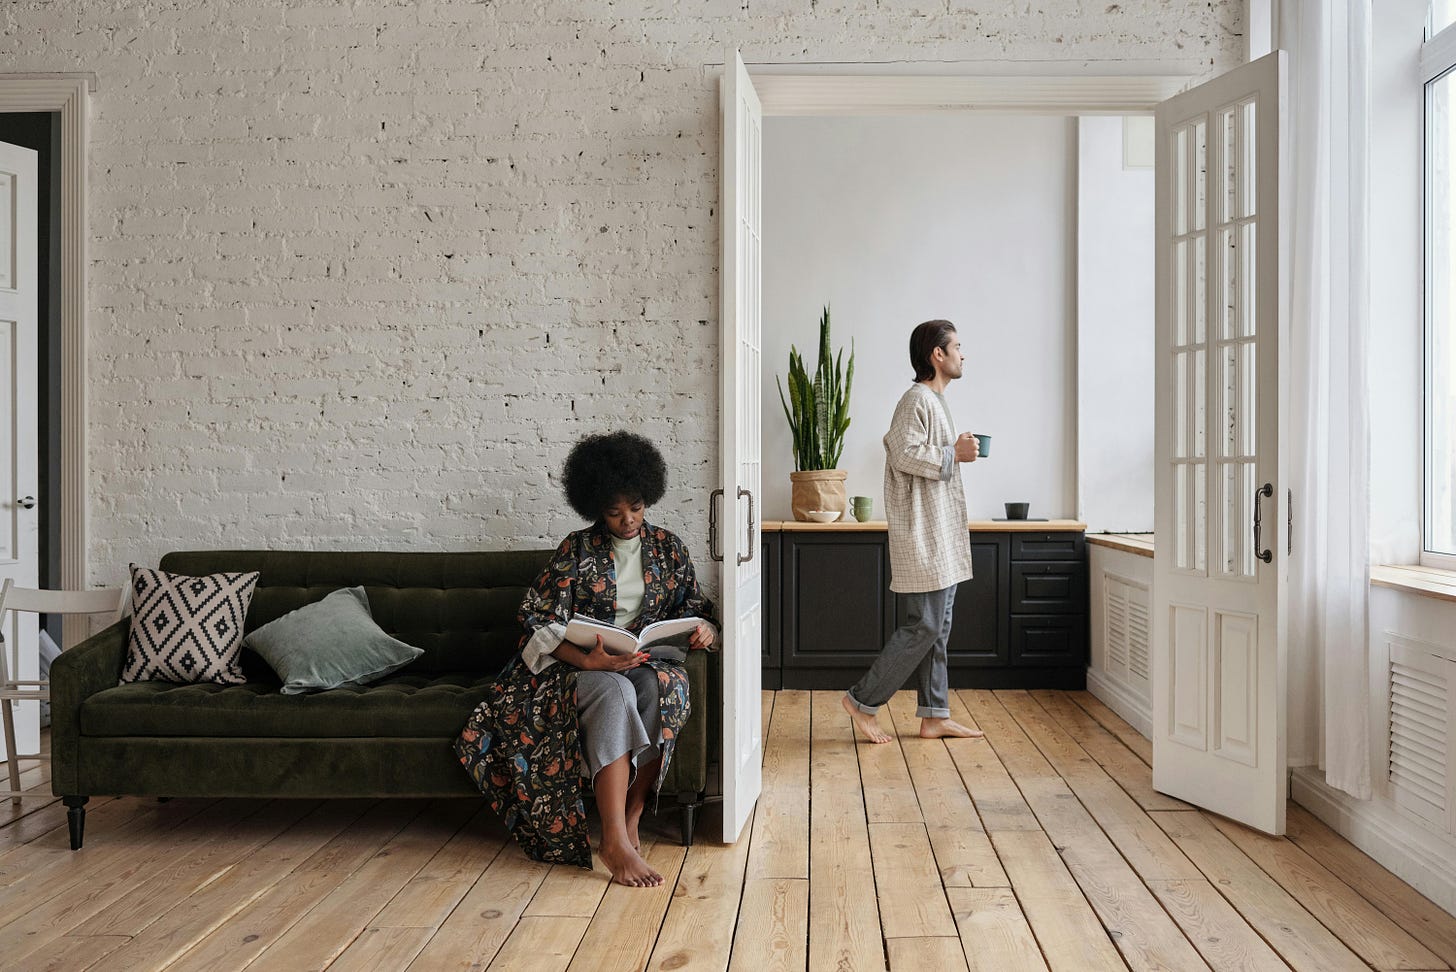 Two rooms with a white brick wall and open two-door doorway between them. A Black woman with Afro sits on a black couch reading, and in the room behind seen through the open doorway, a White man walks with blue coffee cup towards a window. Neither faces towards each other.